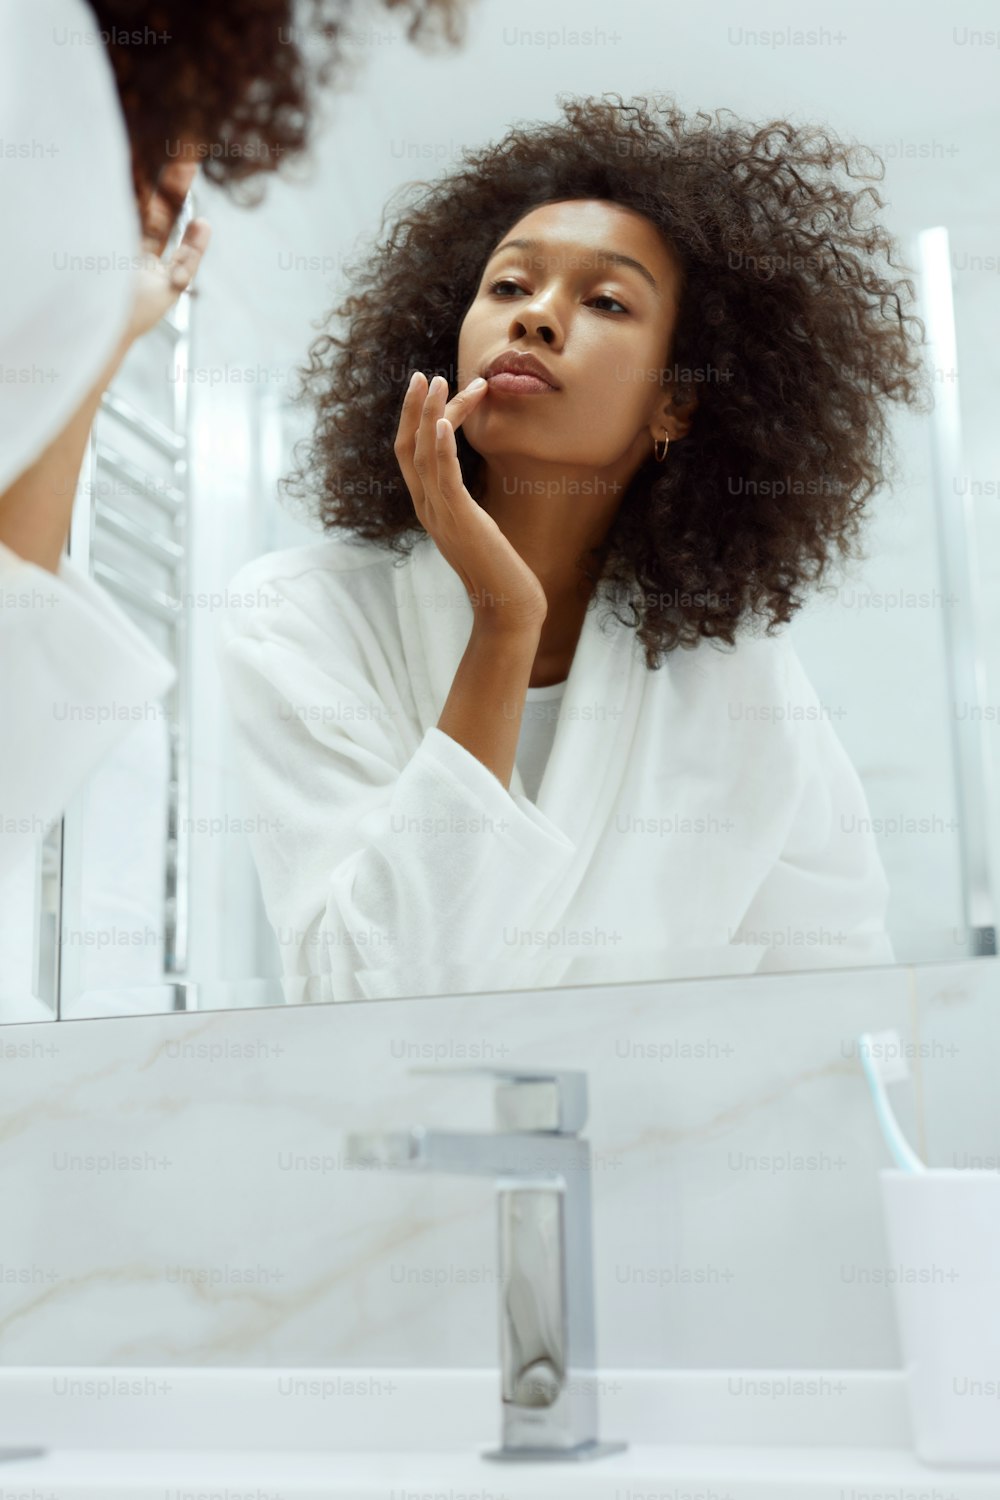 Lips skin care. Woman applying lip balm looking in mirror at bathroom. Portrait of beautiful african girl model with beauty face and natural makeup applying lip product with finger